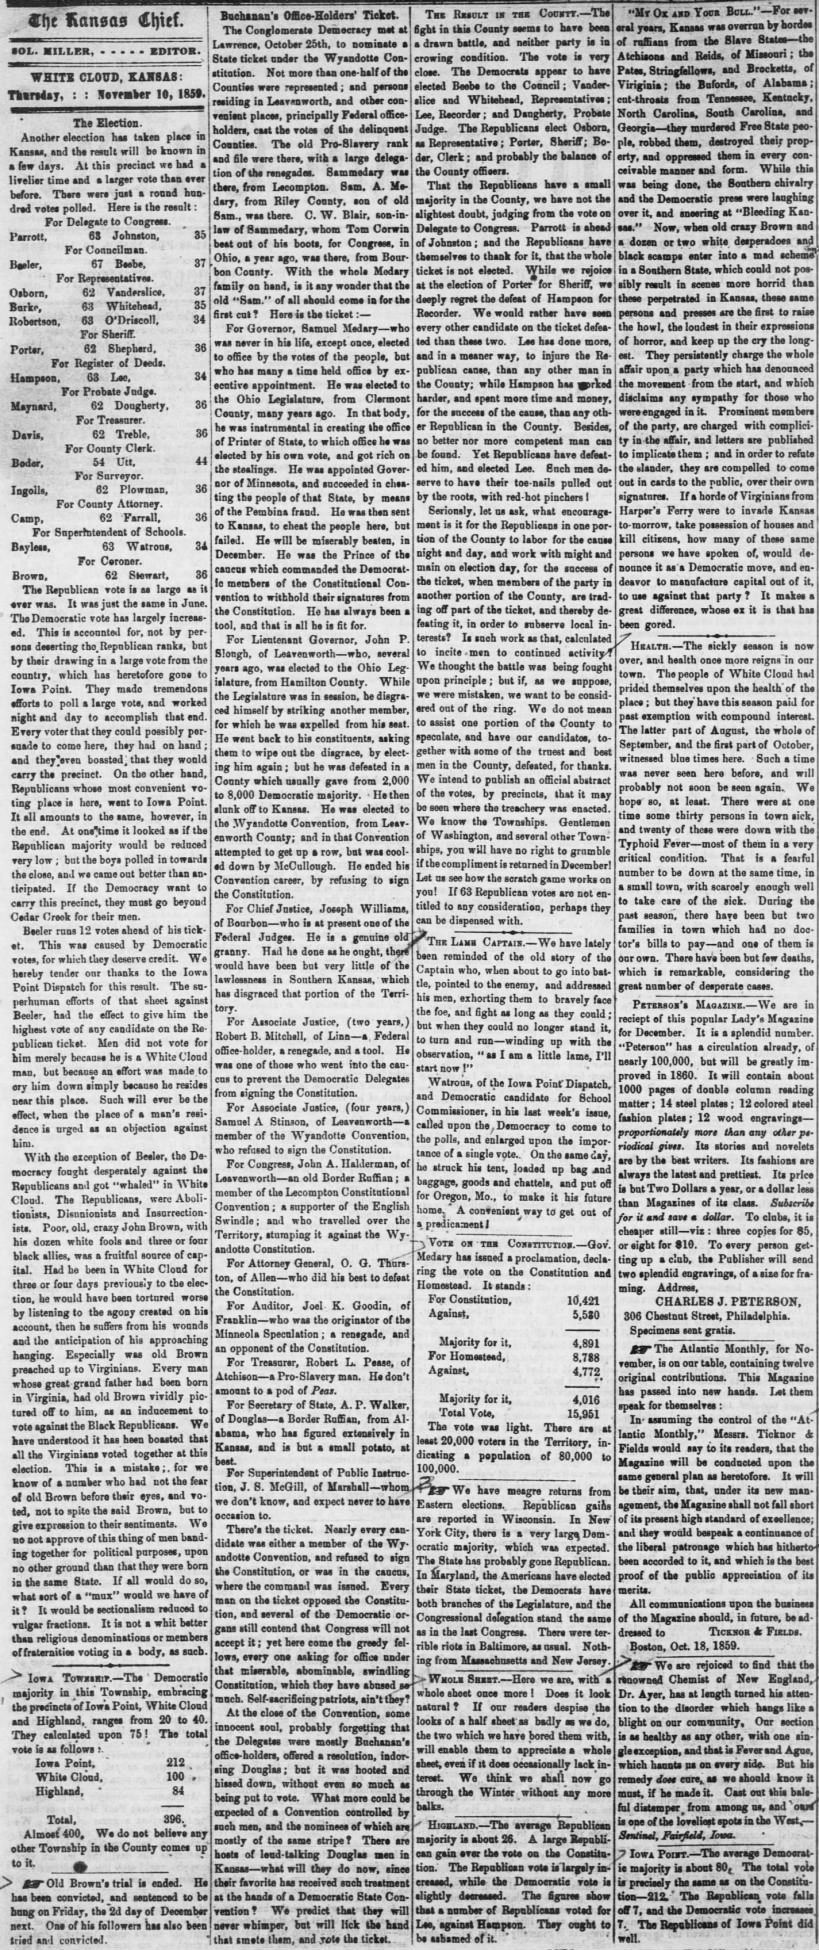 Election Results for Kansas - White Cloud Kansas Chief - 11-10-1859